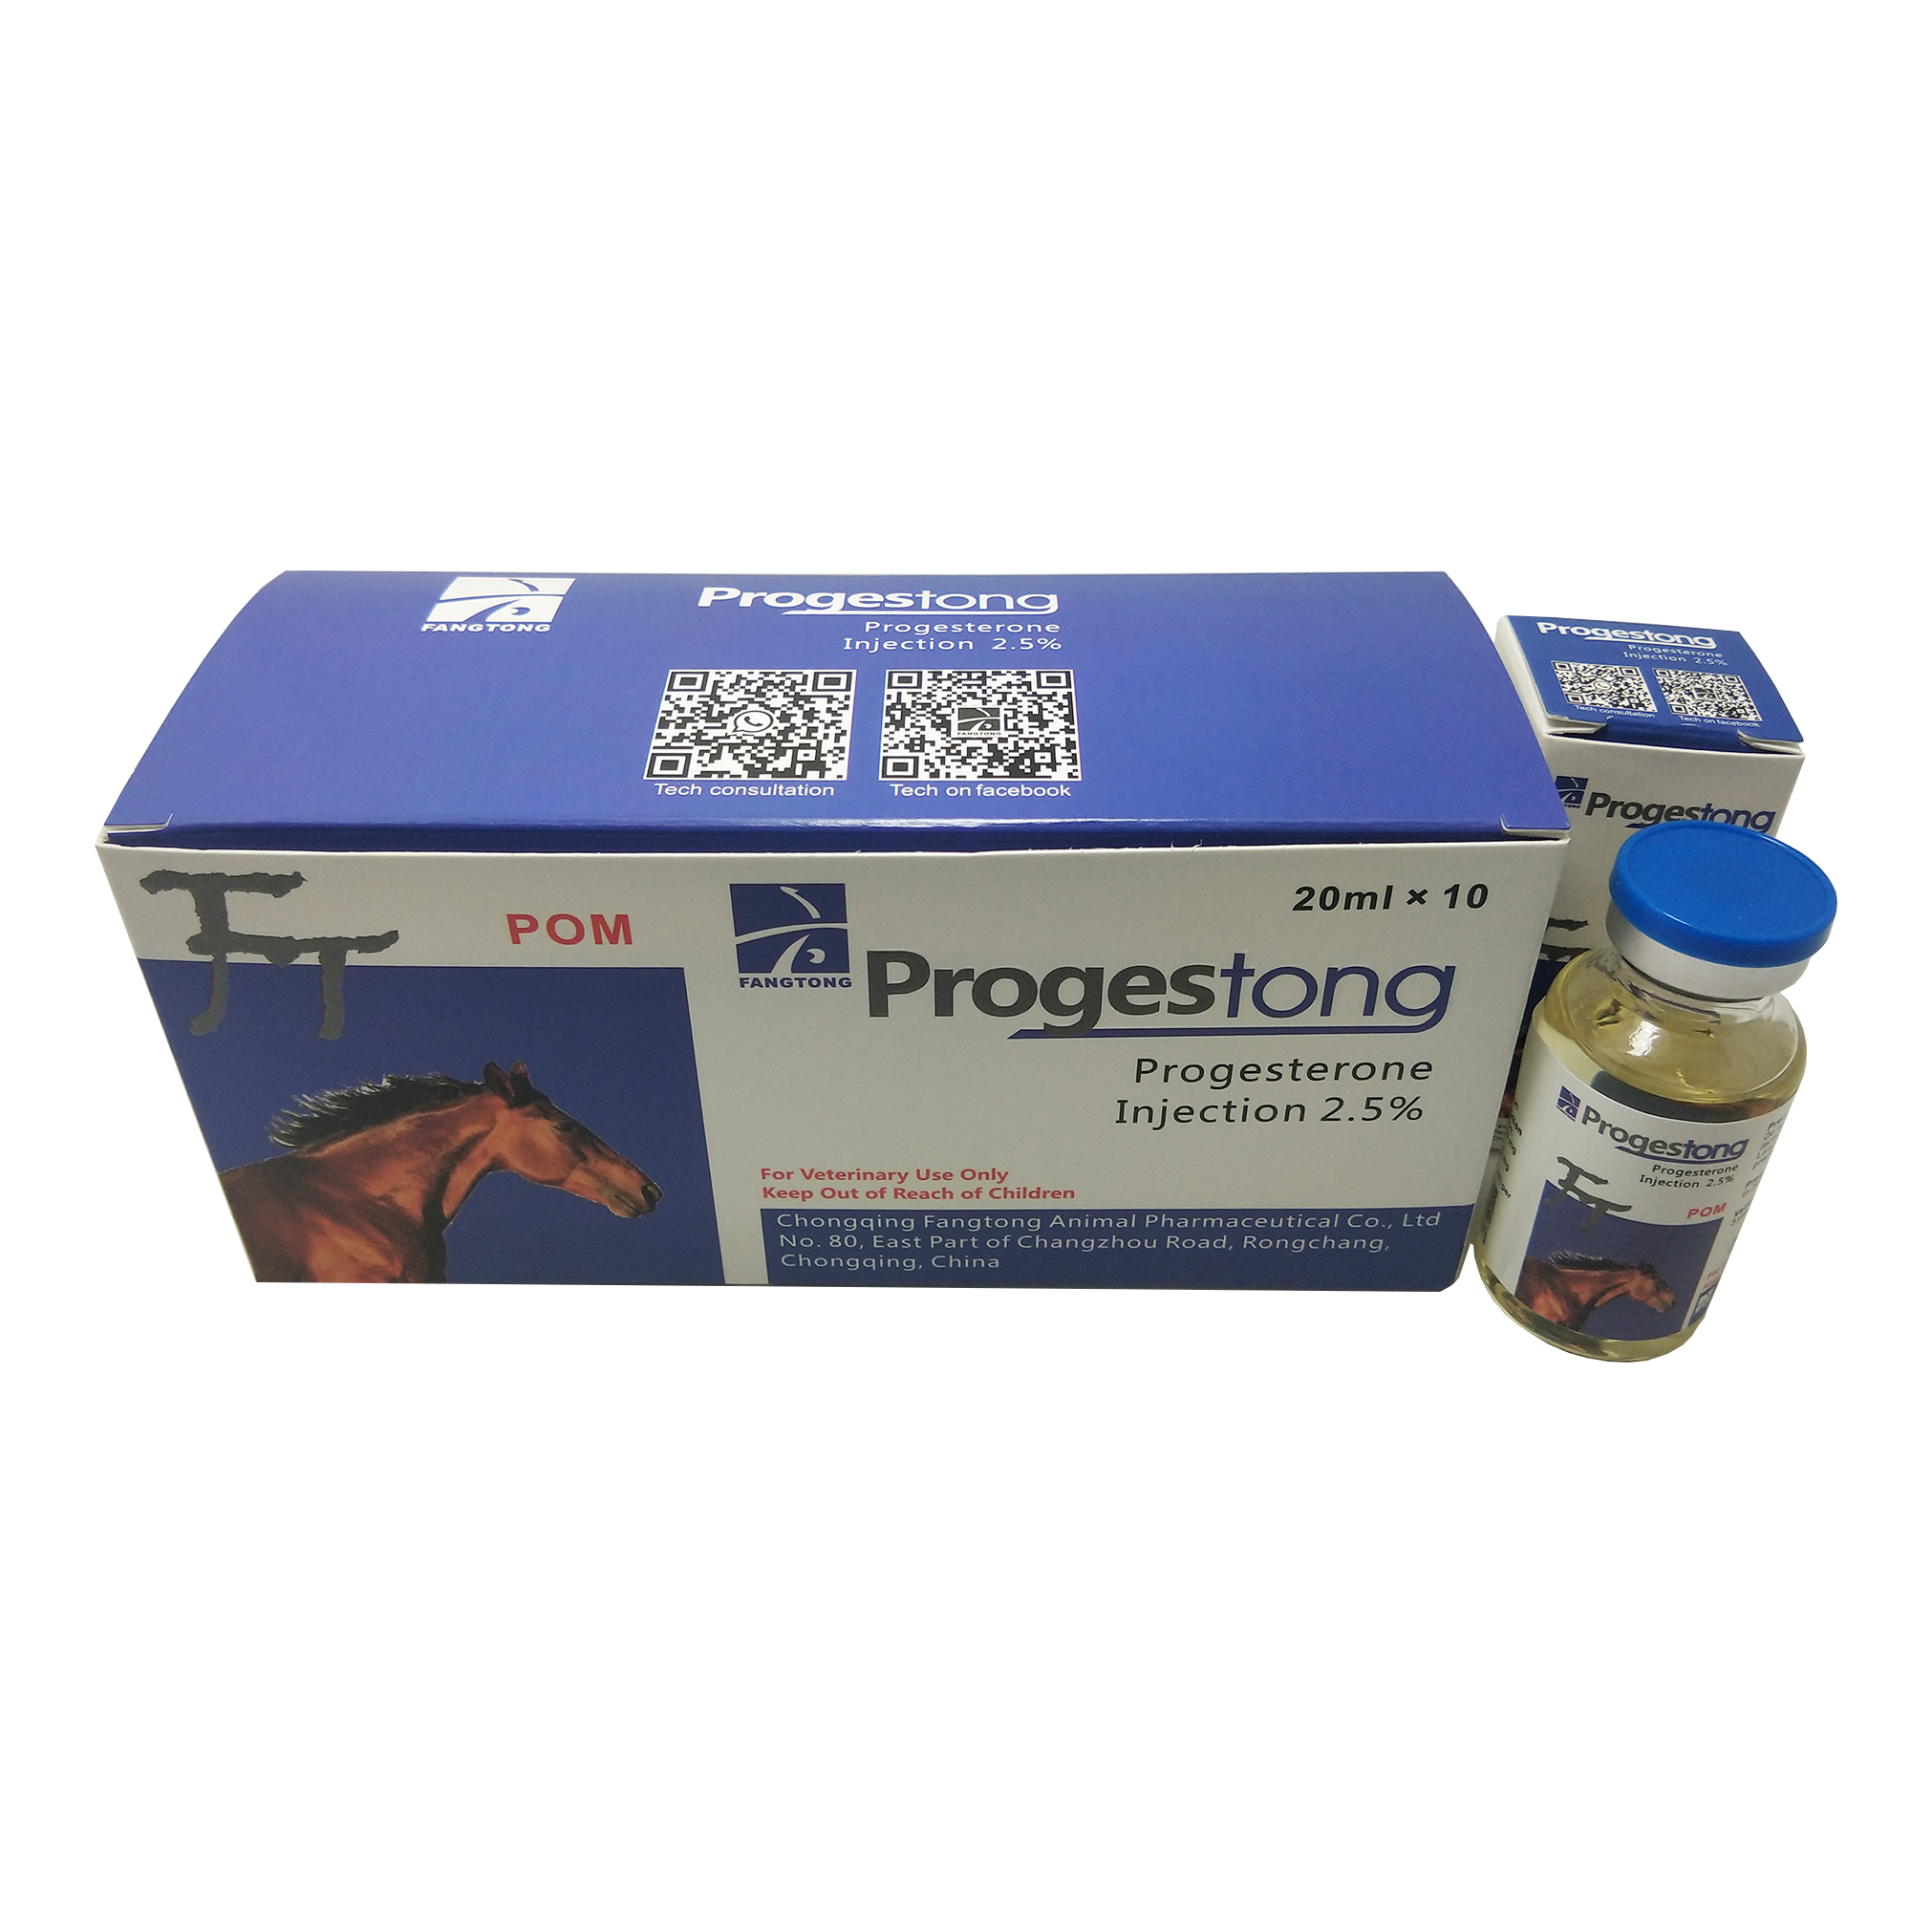 Progesterone Injection 2.5% Featured Image